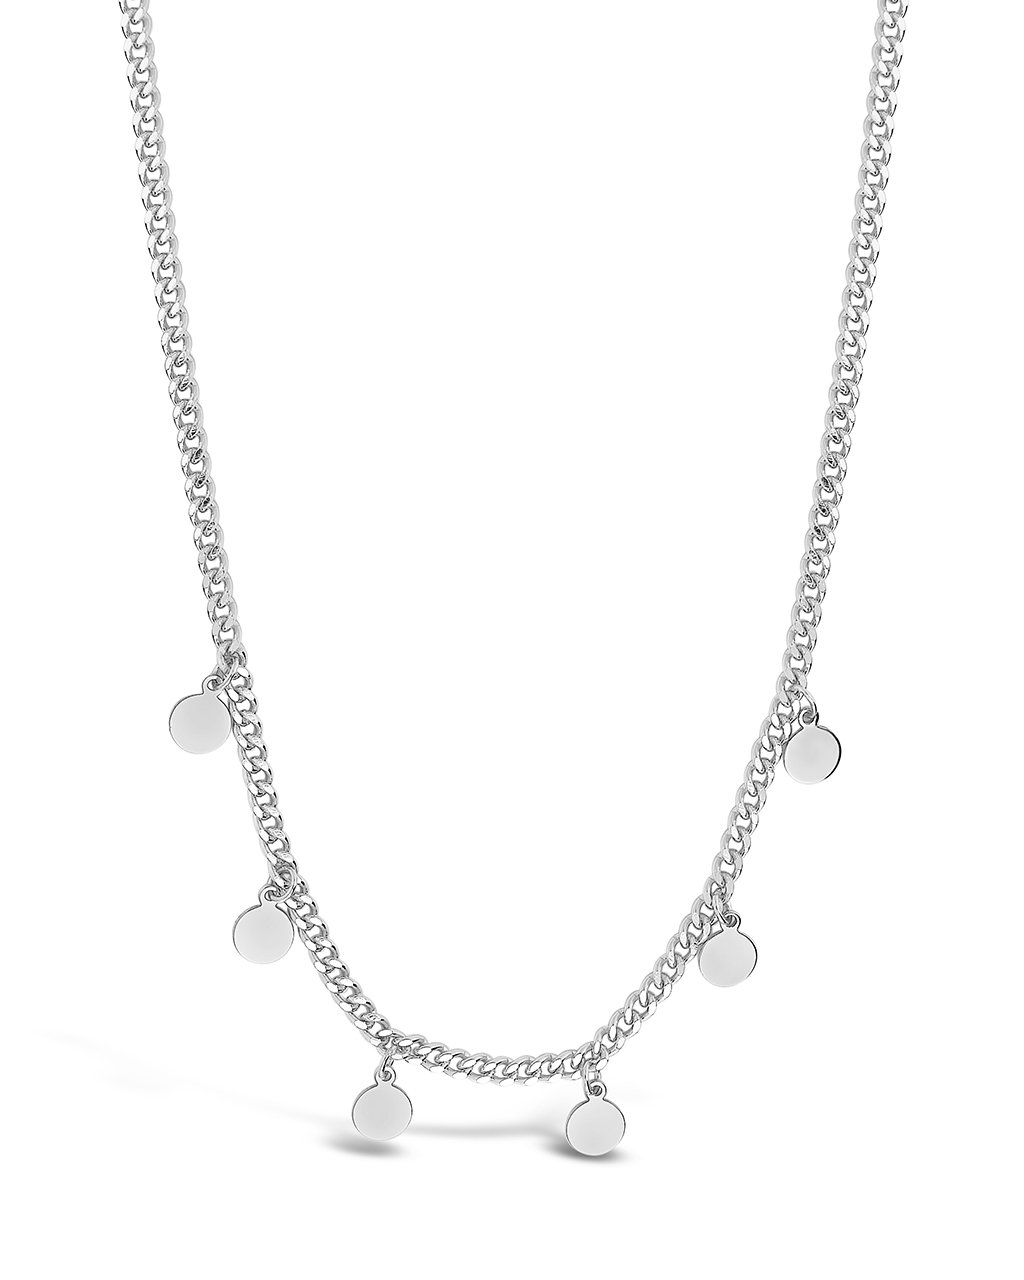 Sterling Silver Dainty Curb Chain with Disk Charms Necklace Sterling Forever Silver 